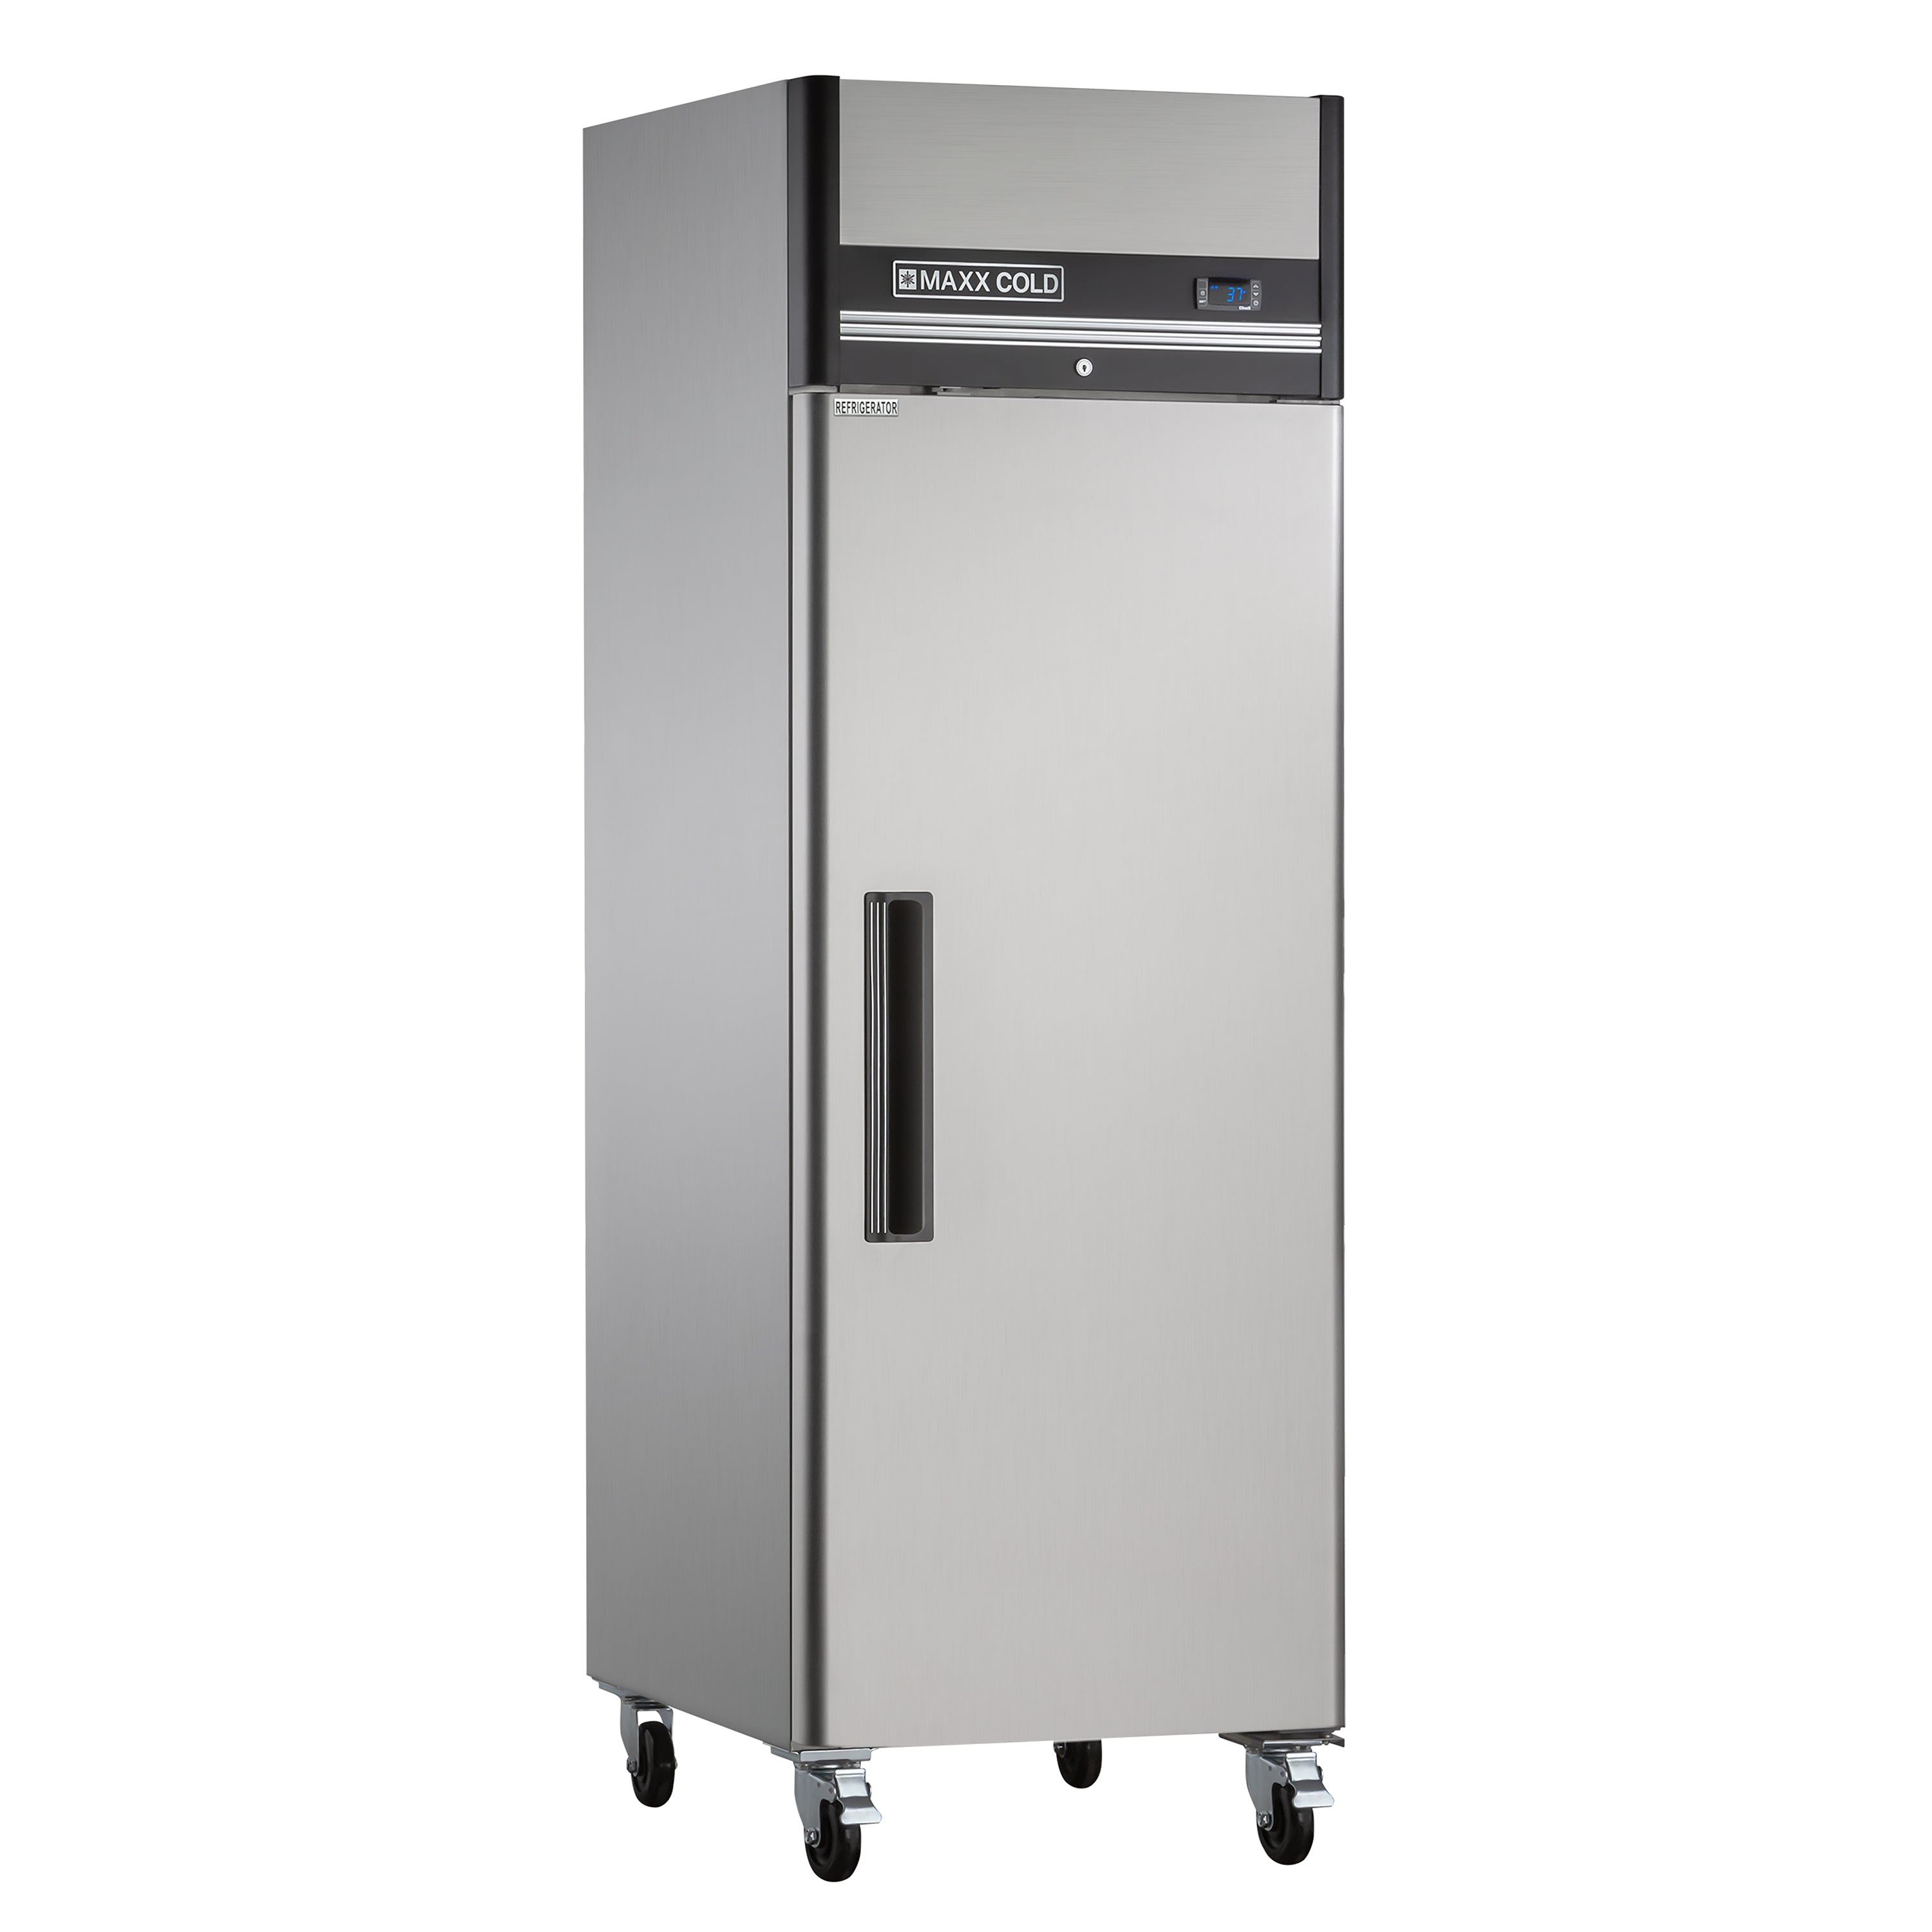 Maxx Cold - MXCR-19FDHC, Maxx Cold Single Door Reach-In Refrigerator, Top Mount, 25.2"W, 19 cu. ft. Storage Capacity, in Stainless Steel